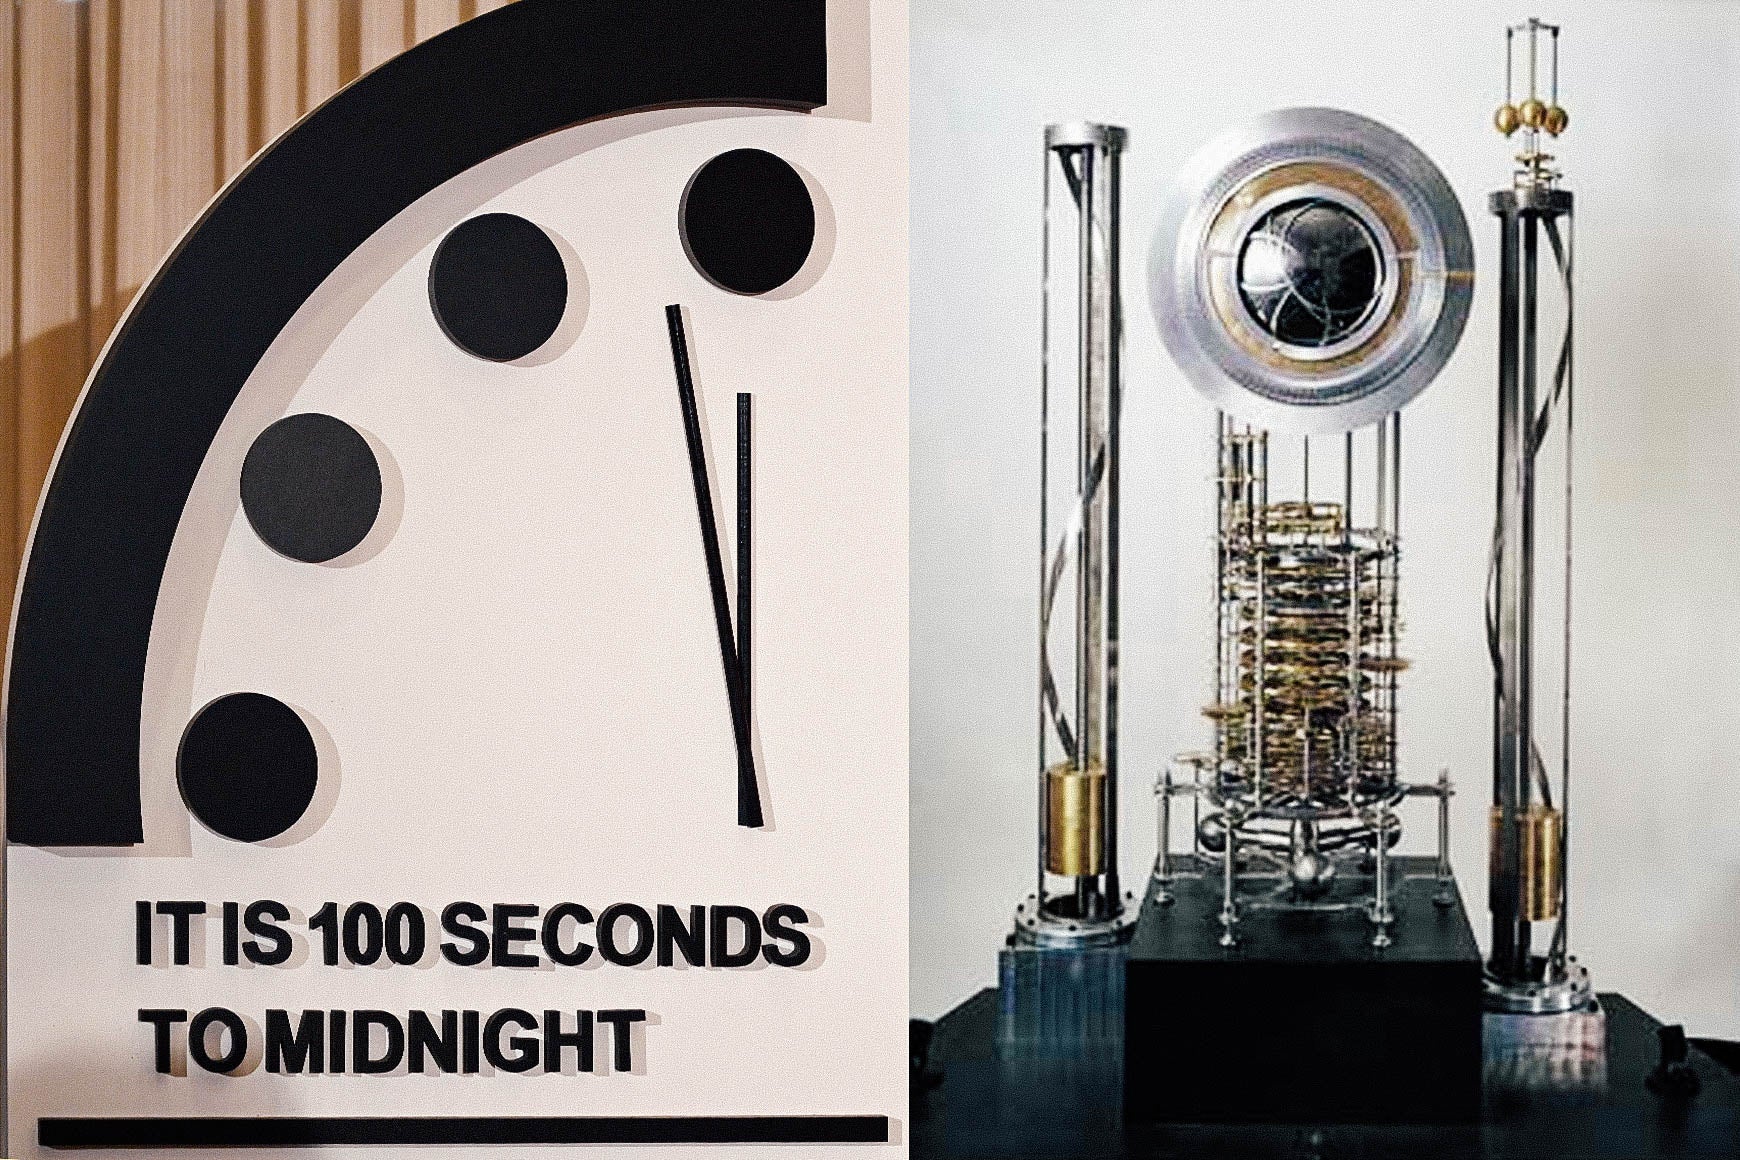 Diptych of the Doomsday Clock reading 100 seconds to midnight and the 10,000 Year Clock prototype.